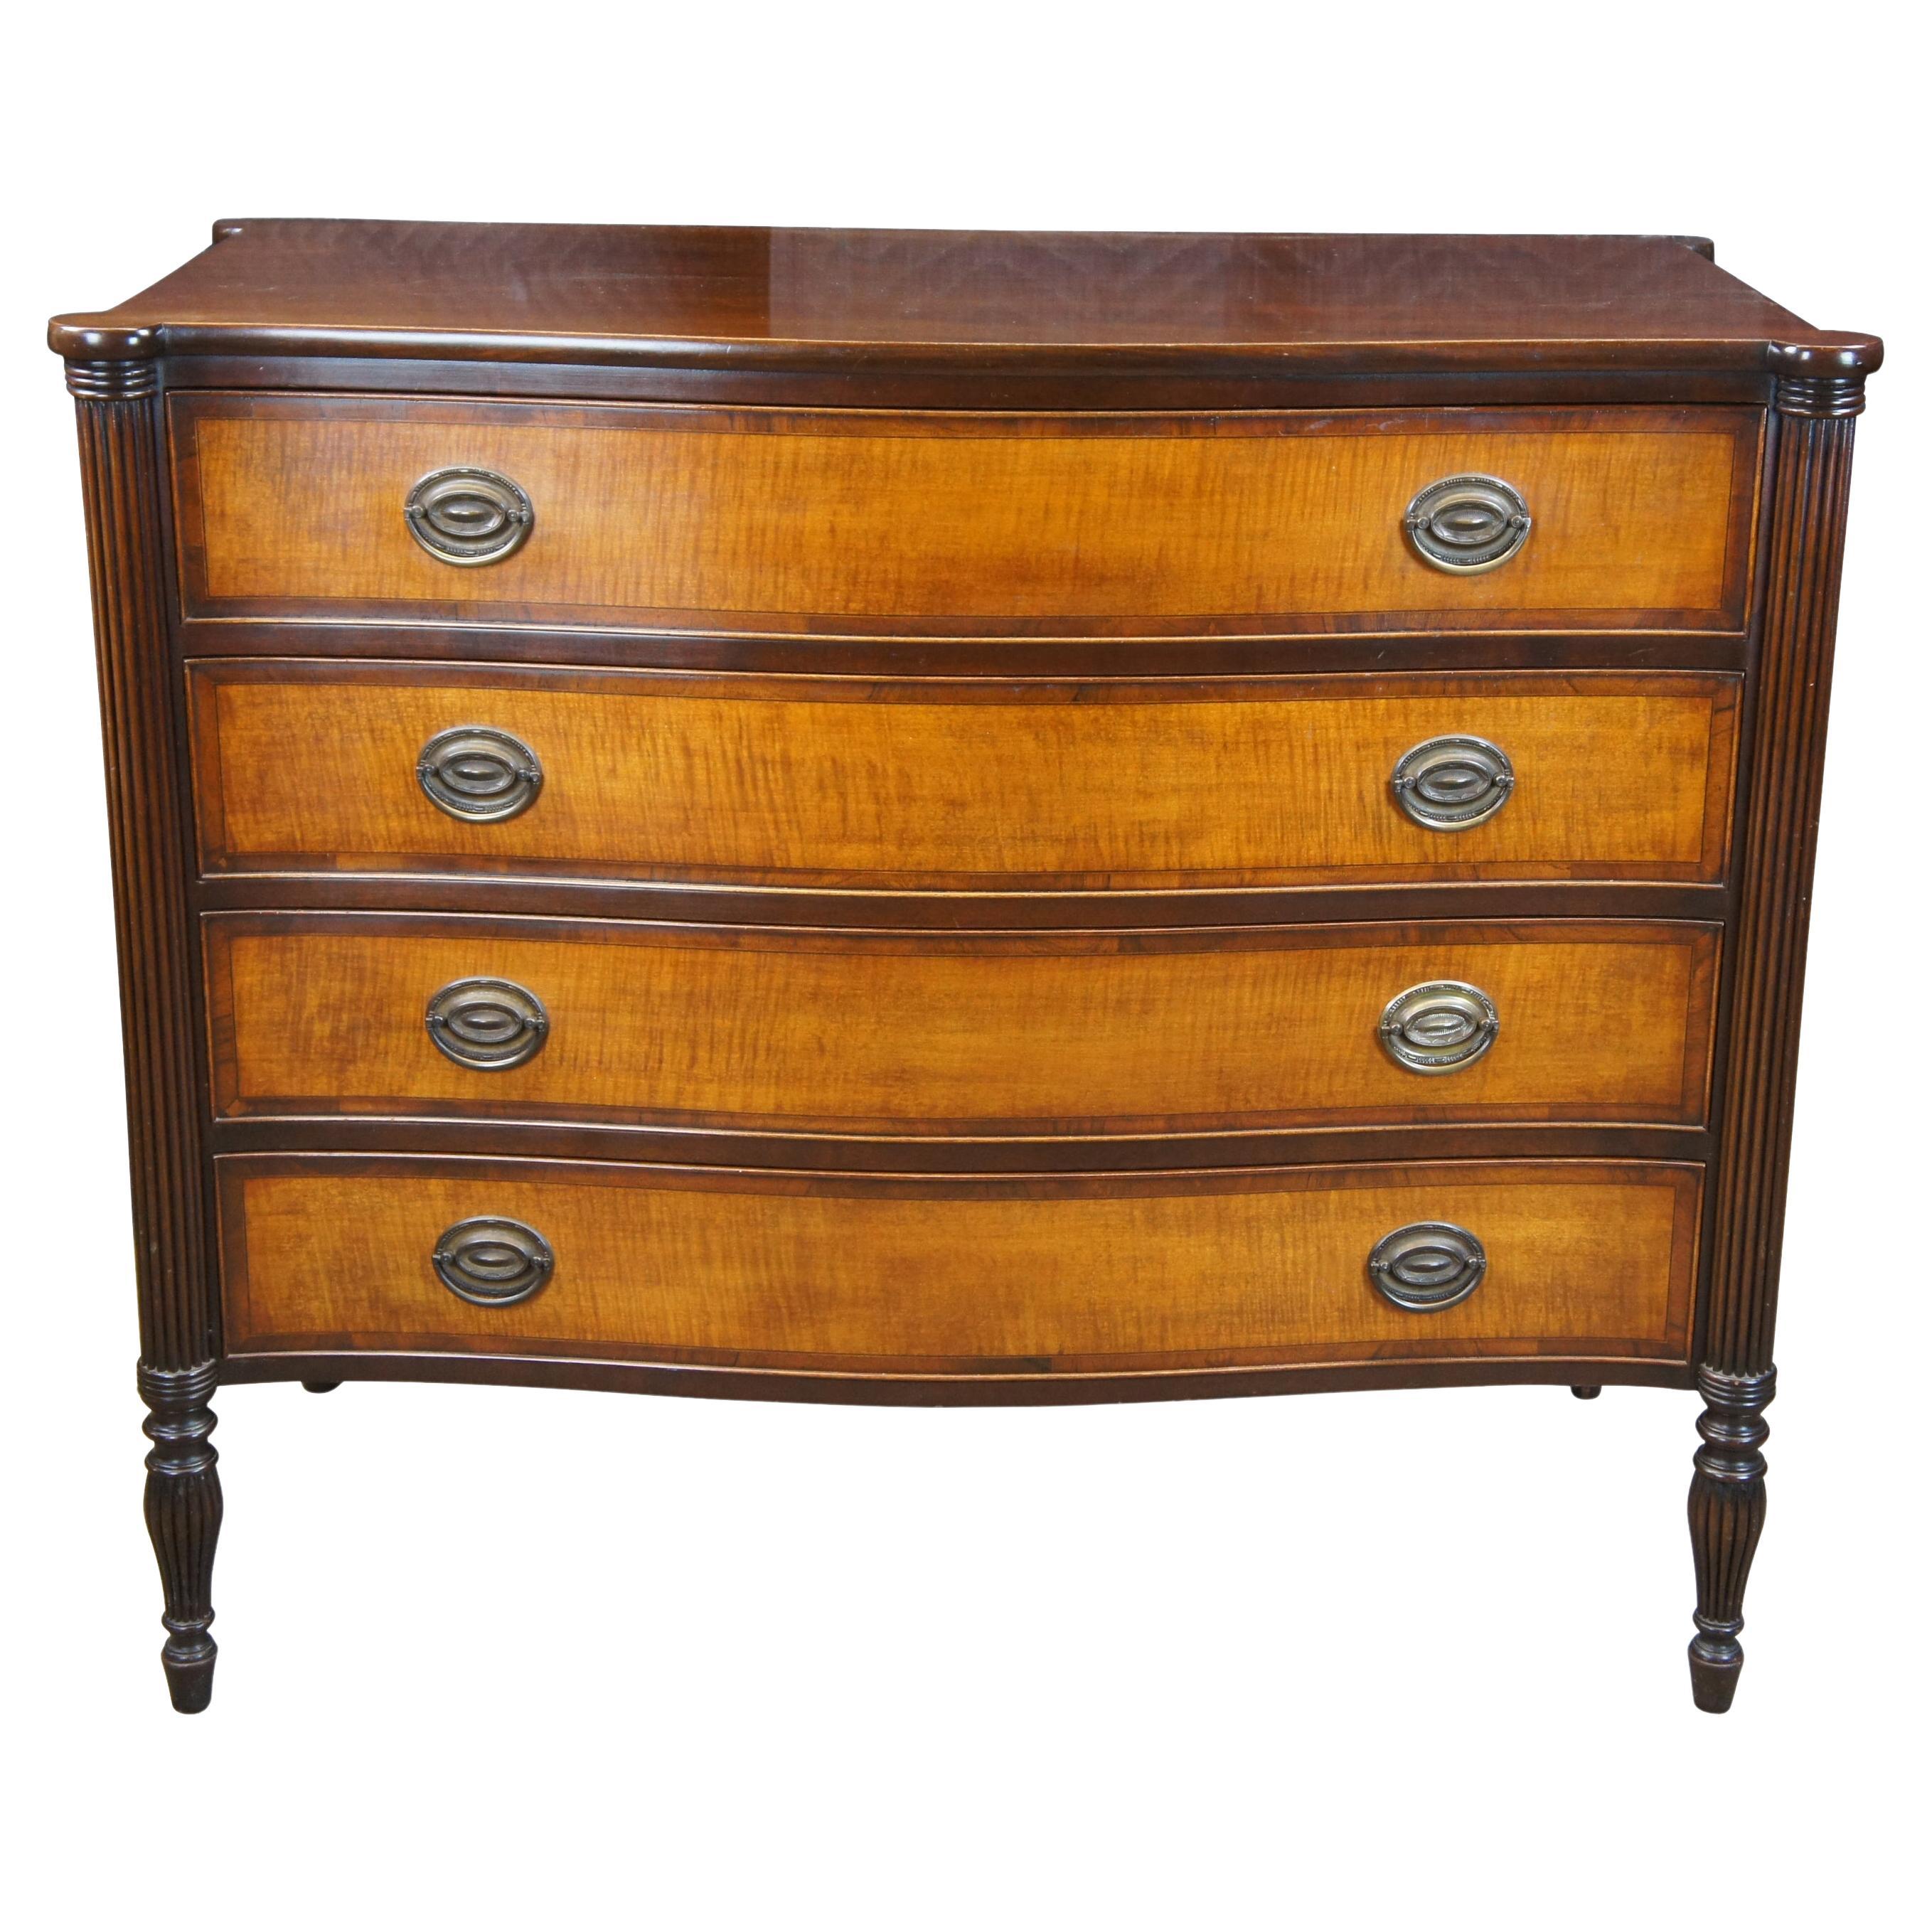 Antique Federal Inlaid Mahogany Flame Birch Serpentine Chest of Drawers Dresser